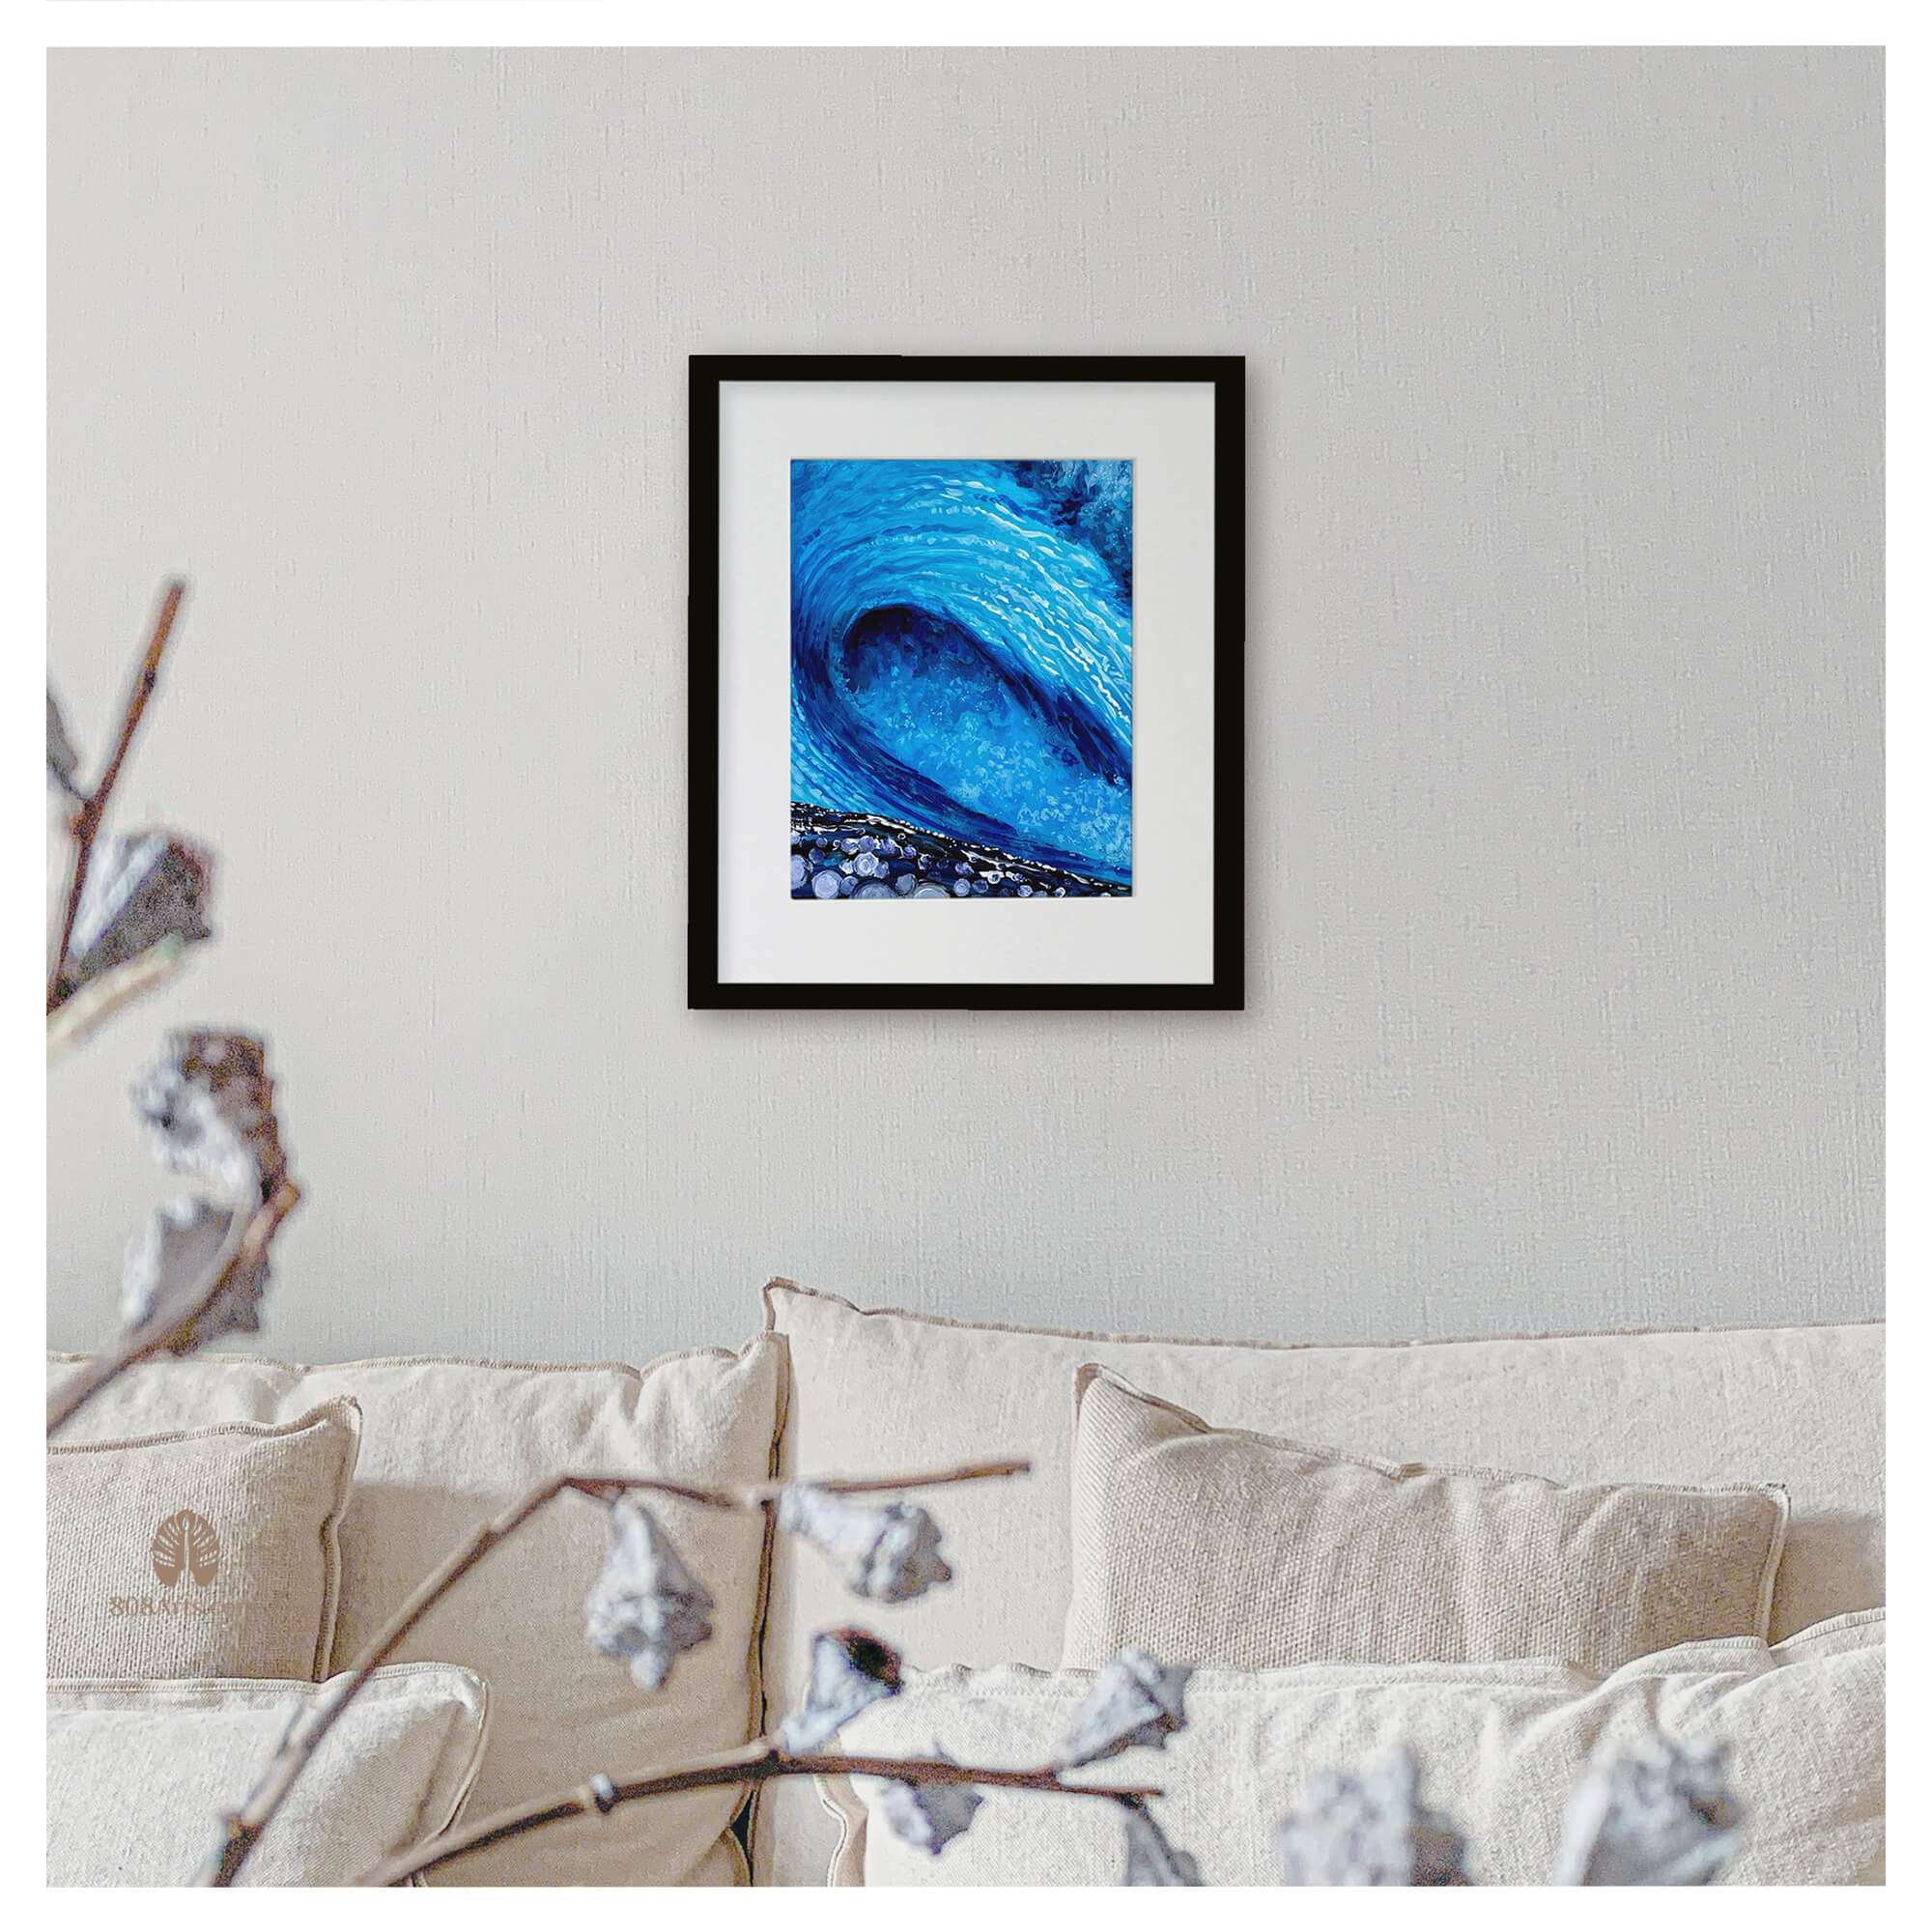 A wall artwork of an original painting featuring a large crashing blue wave by Maui artist Patrick Parker